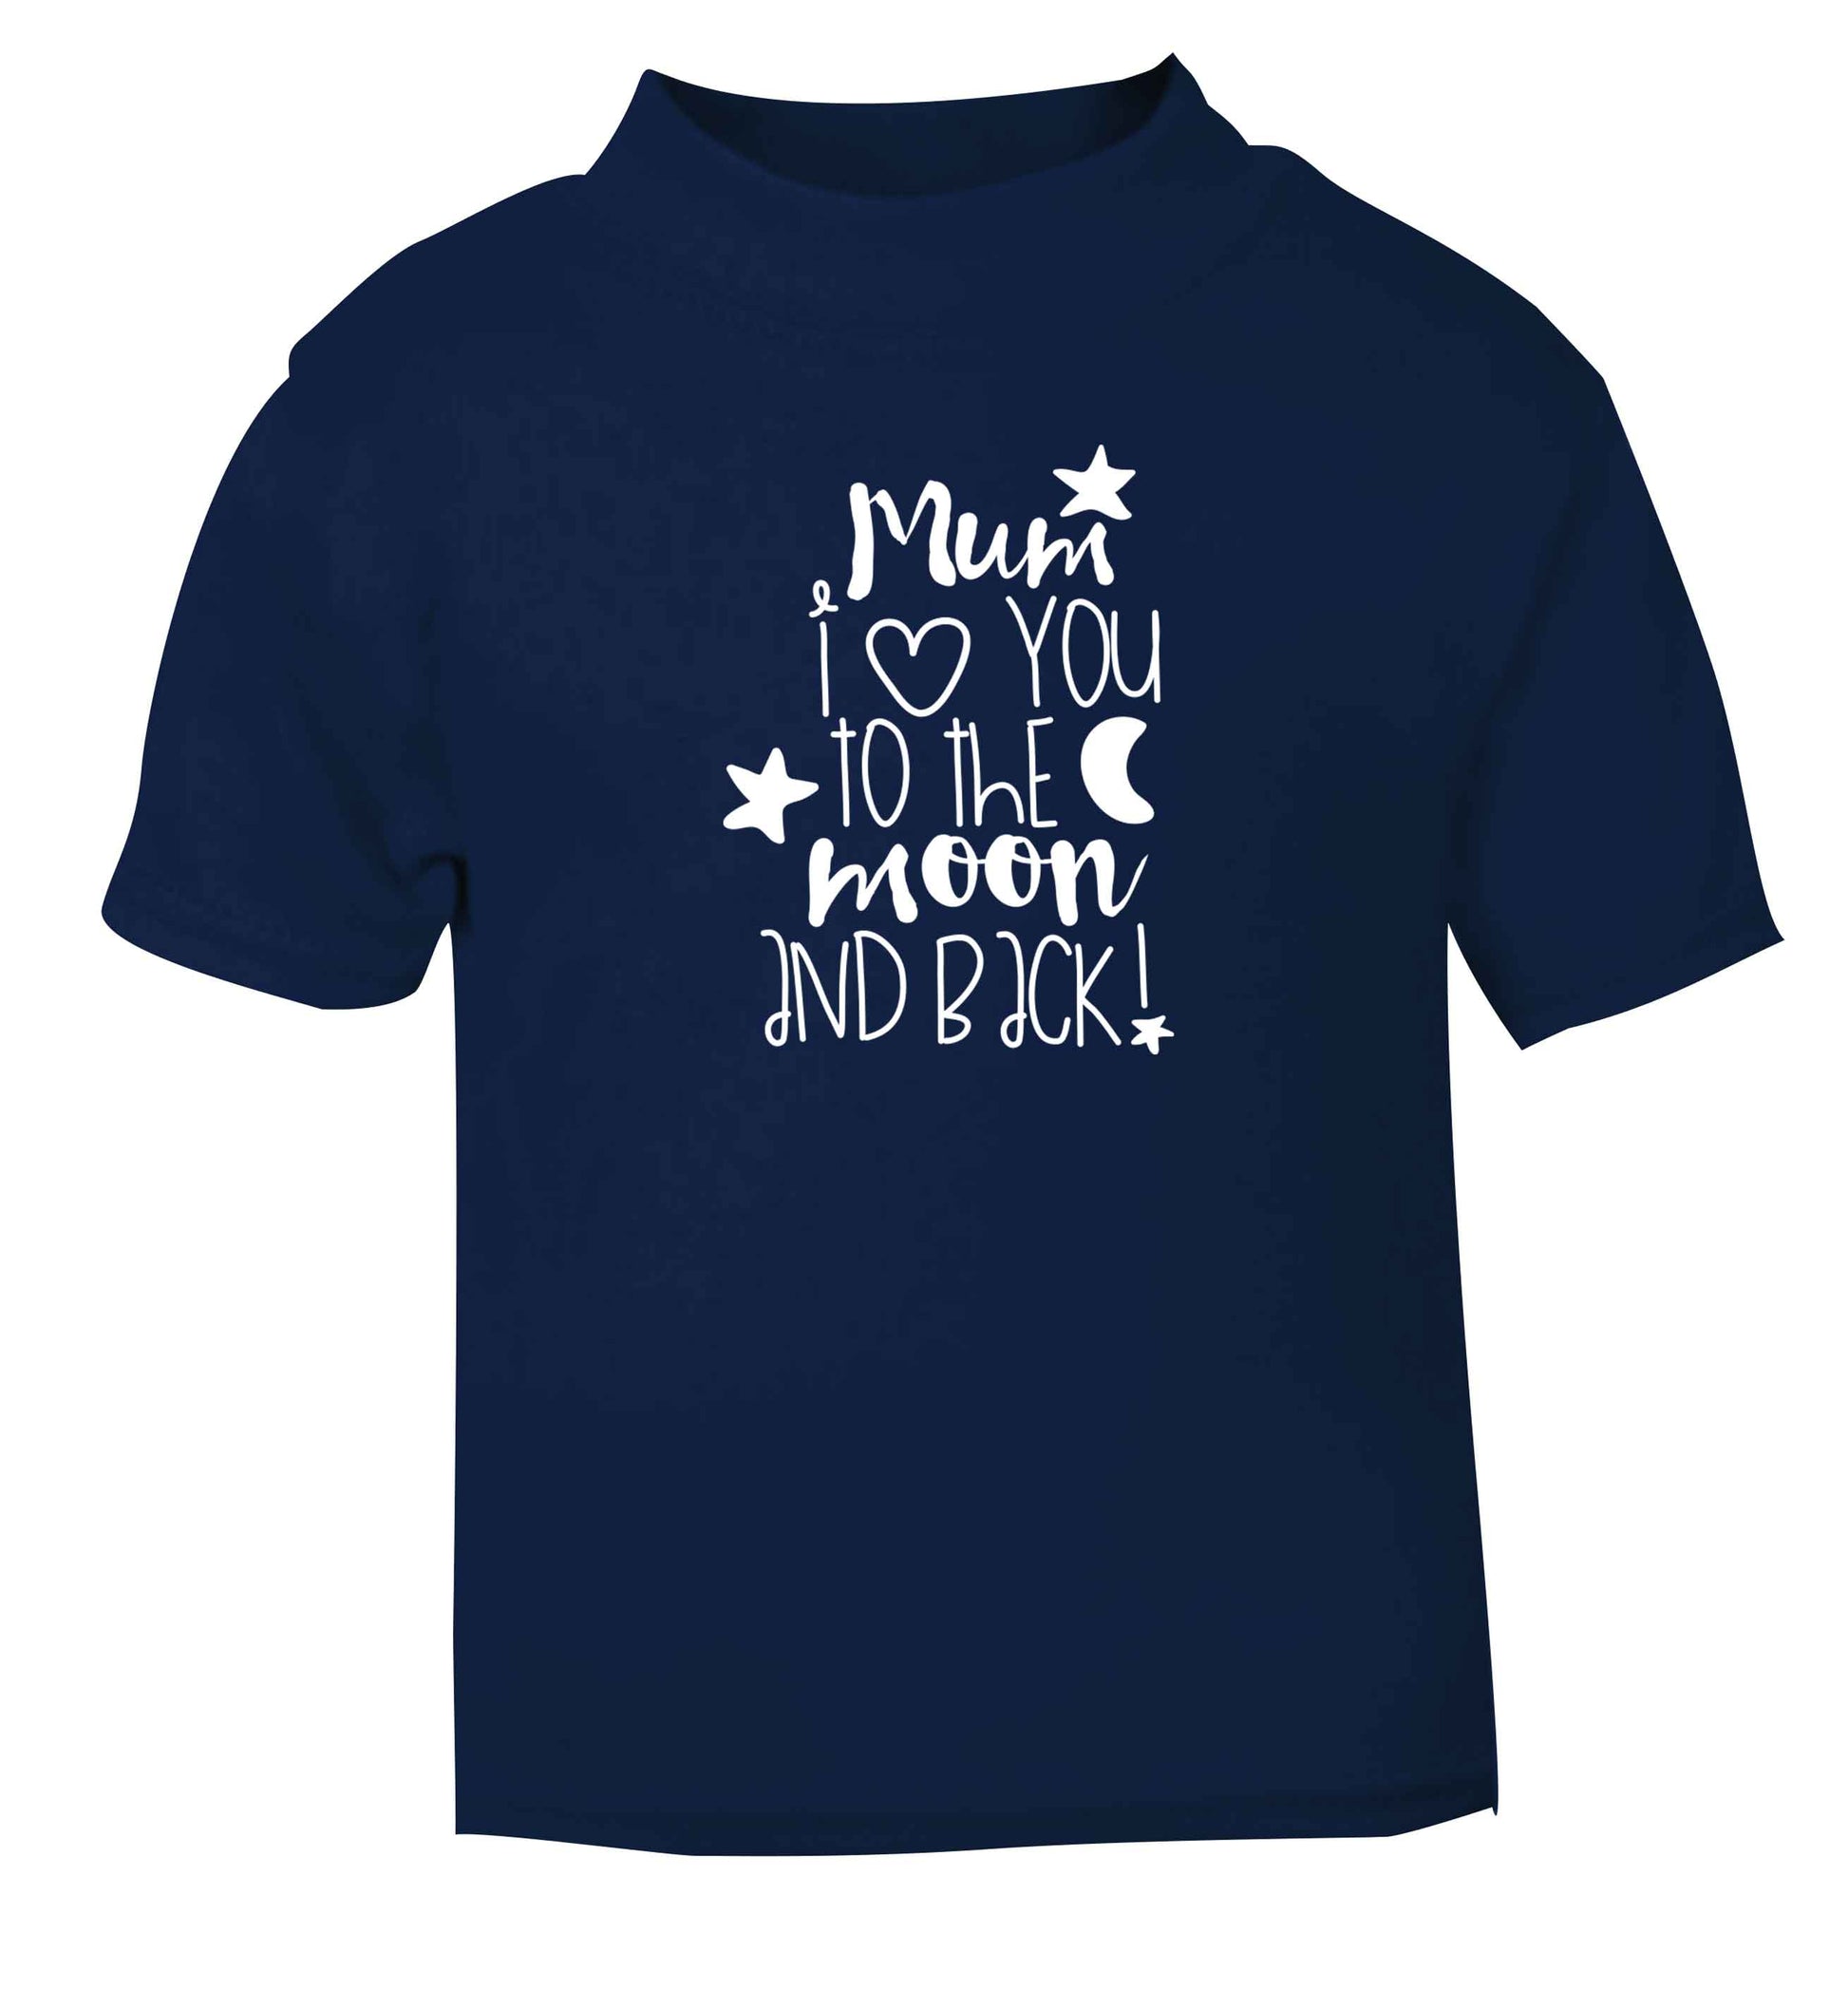 Mum I love you to the moon and back navy baby toddler Tshirt 2 Years